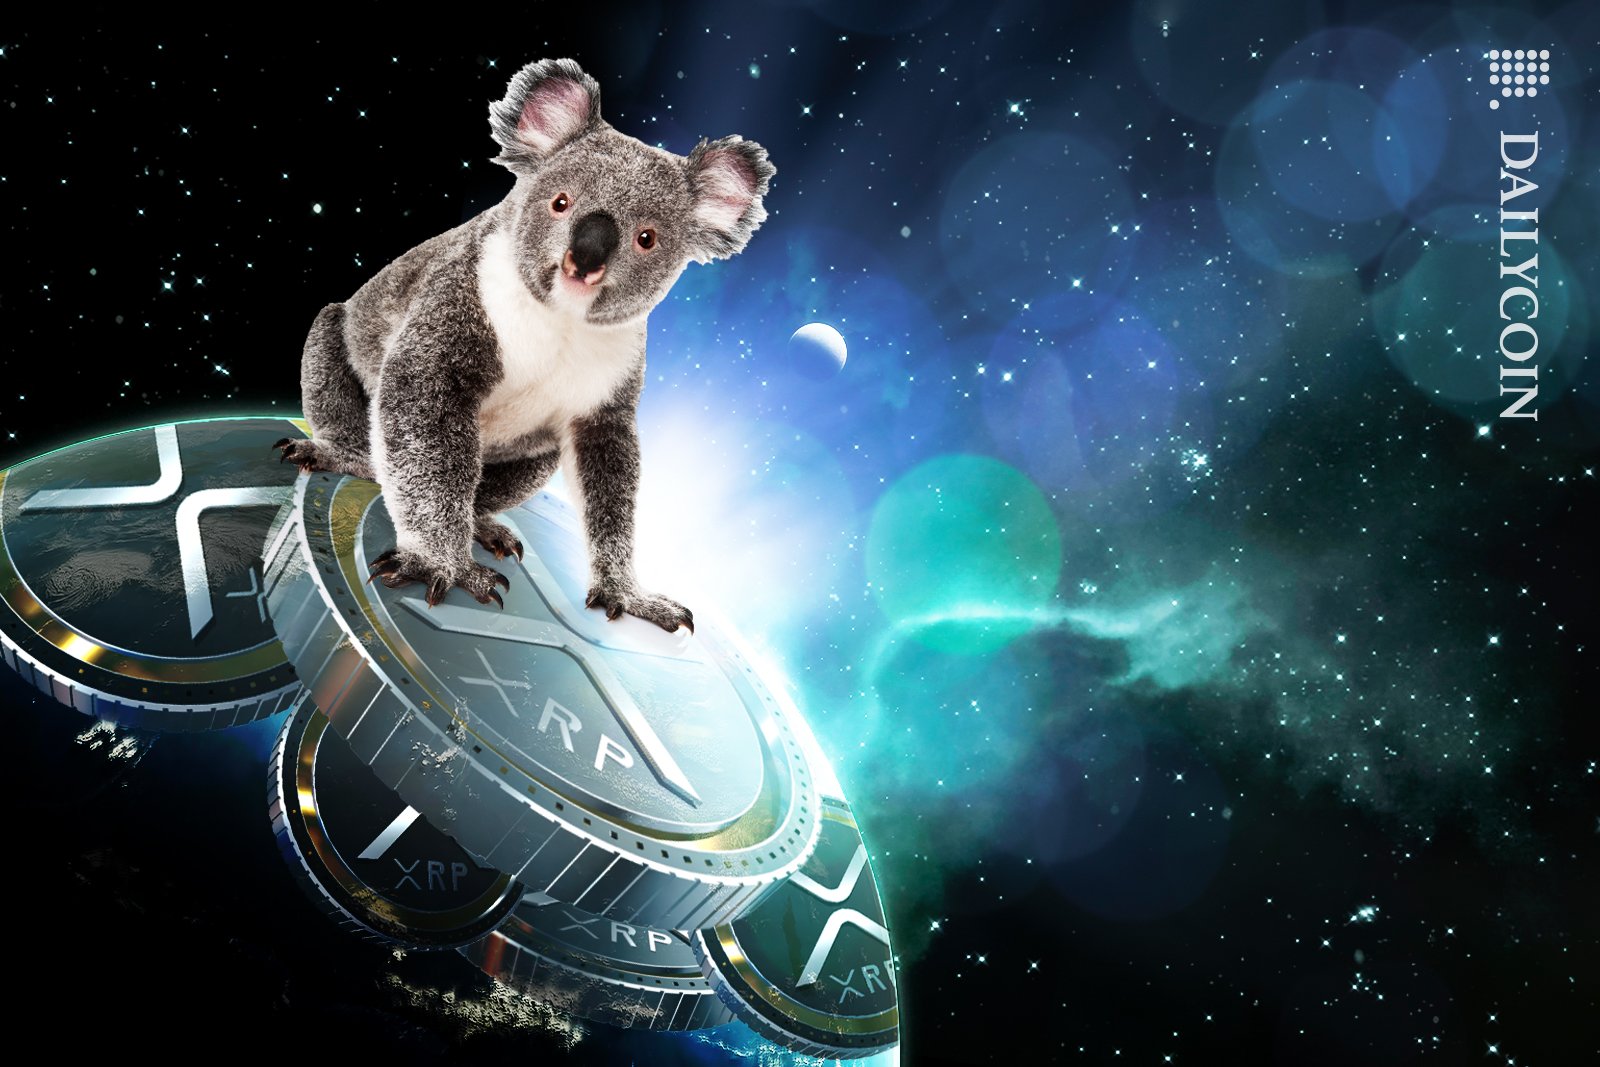 Koala on a transparent globe with XRP tokens inside.